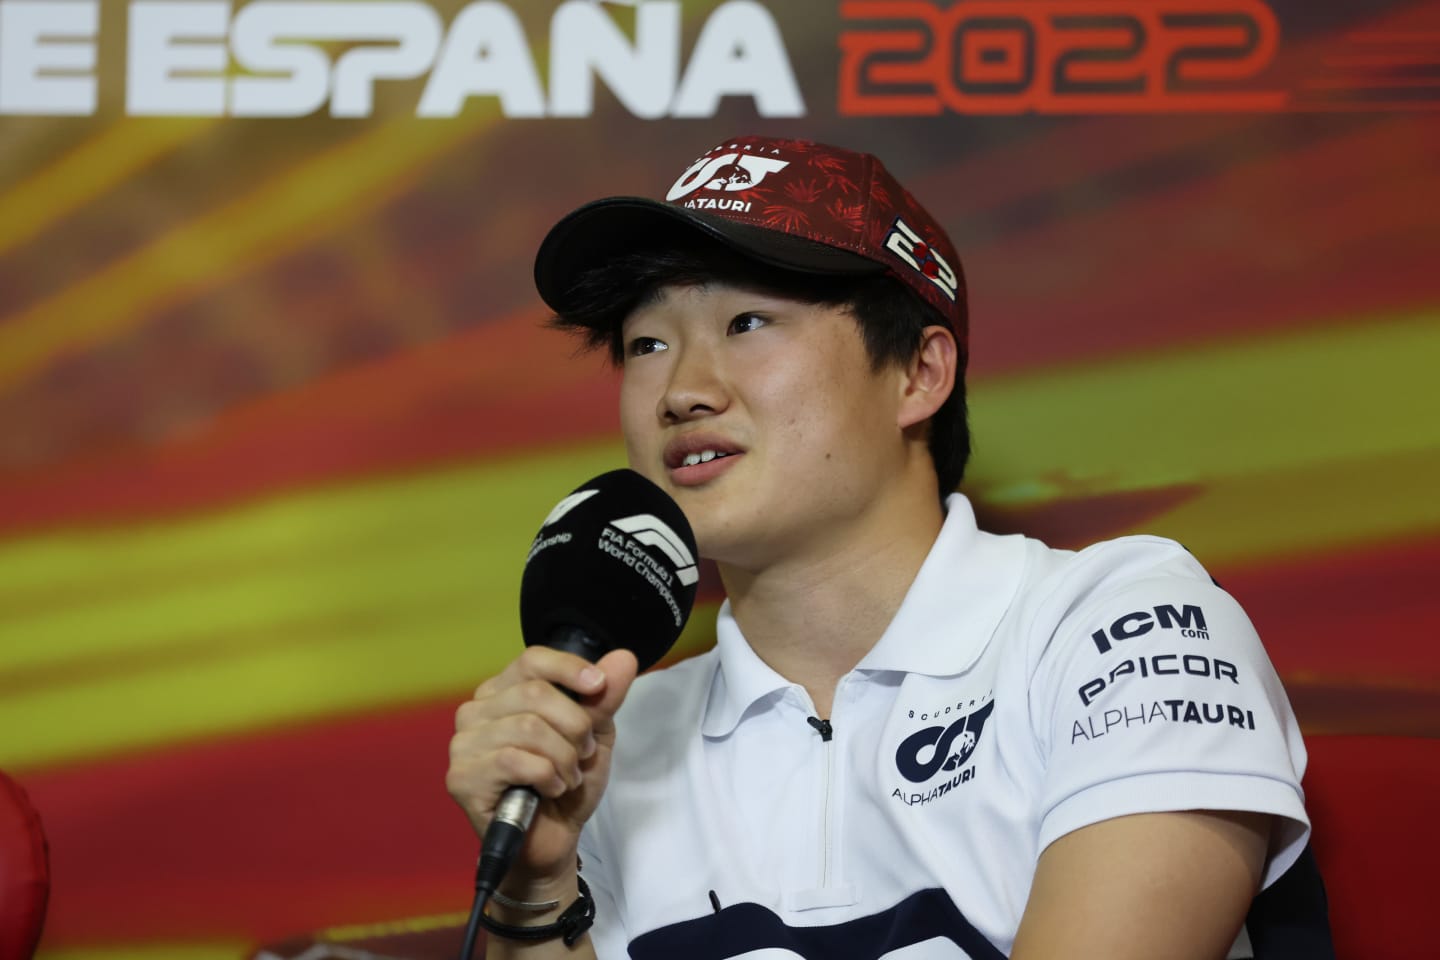 BARCELONA, SPAIN - MAY 20: Yuki Tsunoda of Japan and Scuderia AlphaTauri talks in the Drivers Press Conference prior to practice ahead of the F1 Grand Prix of Spain at Circuit de Barcelona-Catalunya on May 20, 2022 in Barcelona, Spain. (Photo by Bryn Lennon/Getty Images)